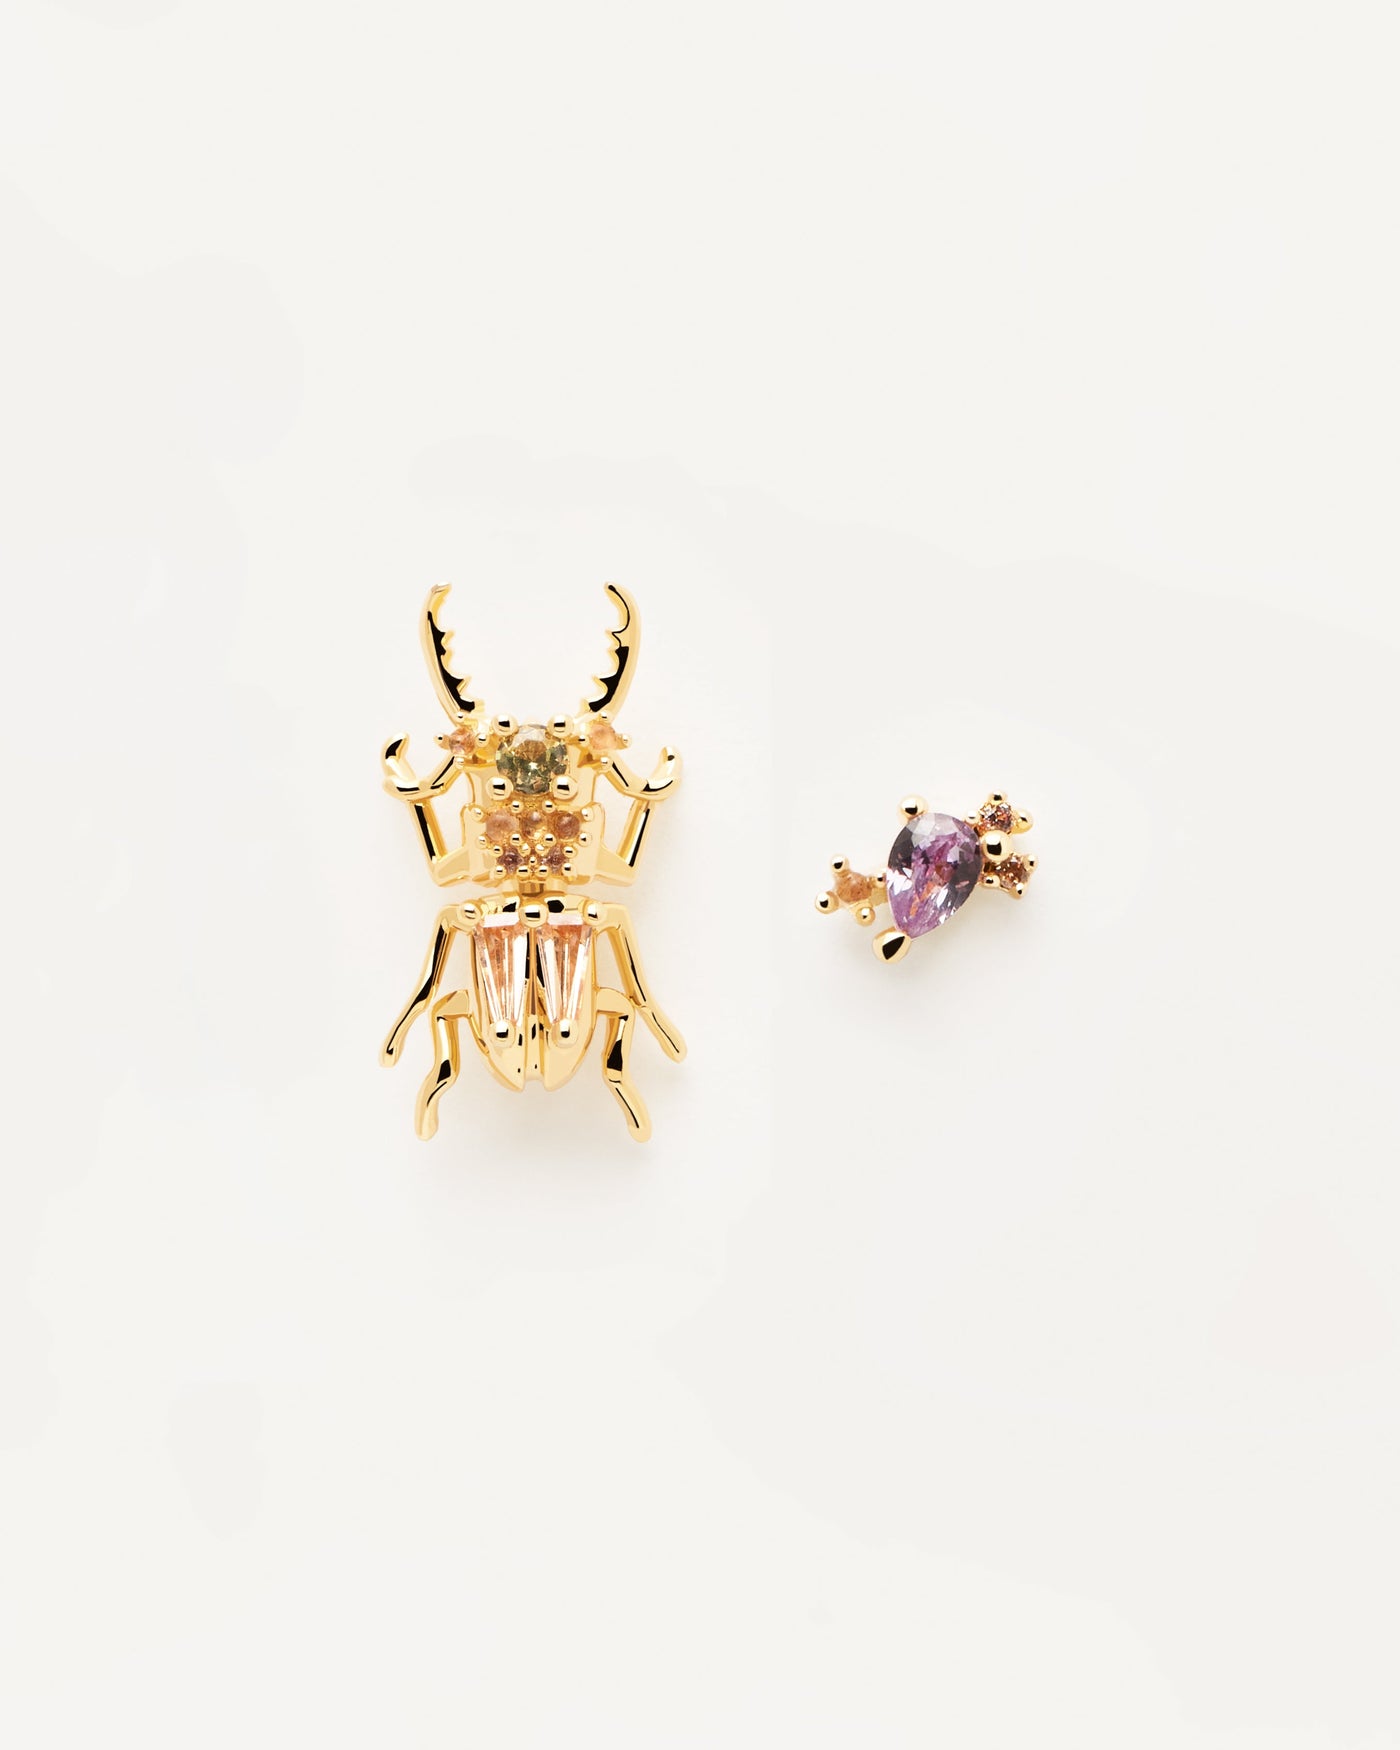 2023 Selection | Courage Beetle Gold Earrings. Get the latest arrival from PDPAOLA. Place your order safely and get this Best Seller. Free Shipping over 40€